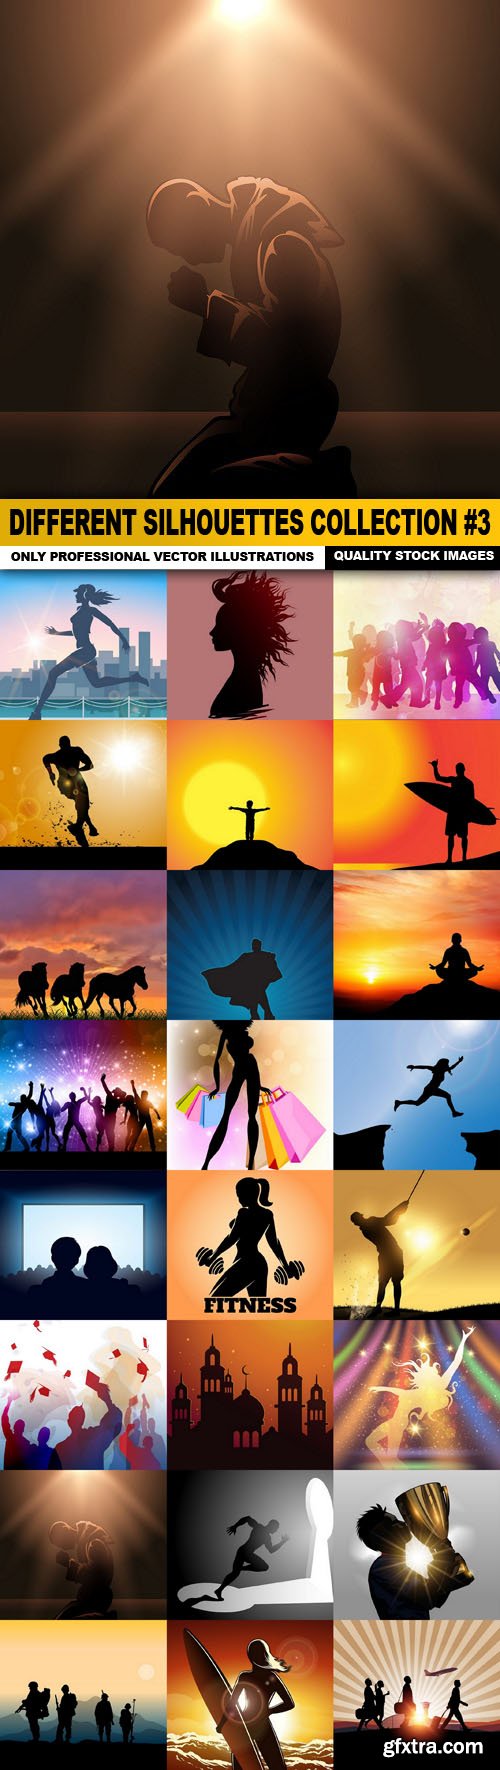 Different Silhouettes Collection #3 - 25 Vector